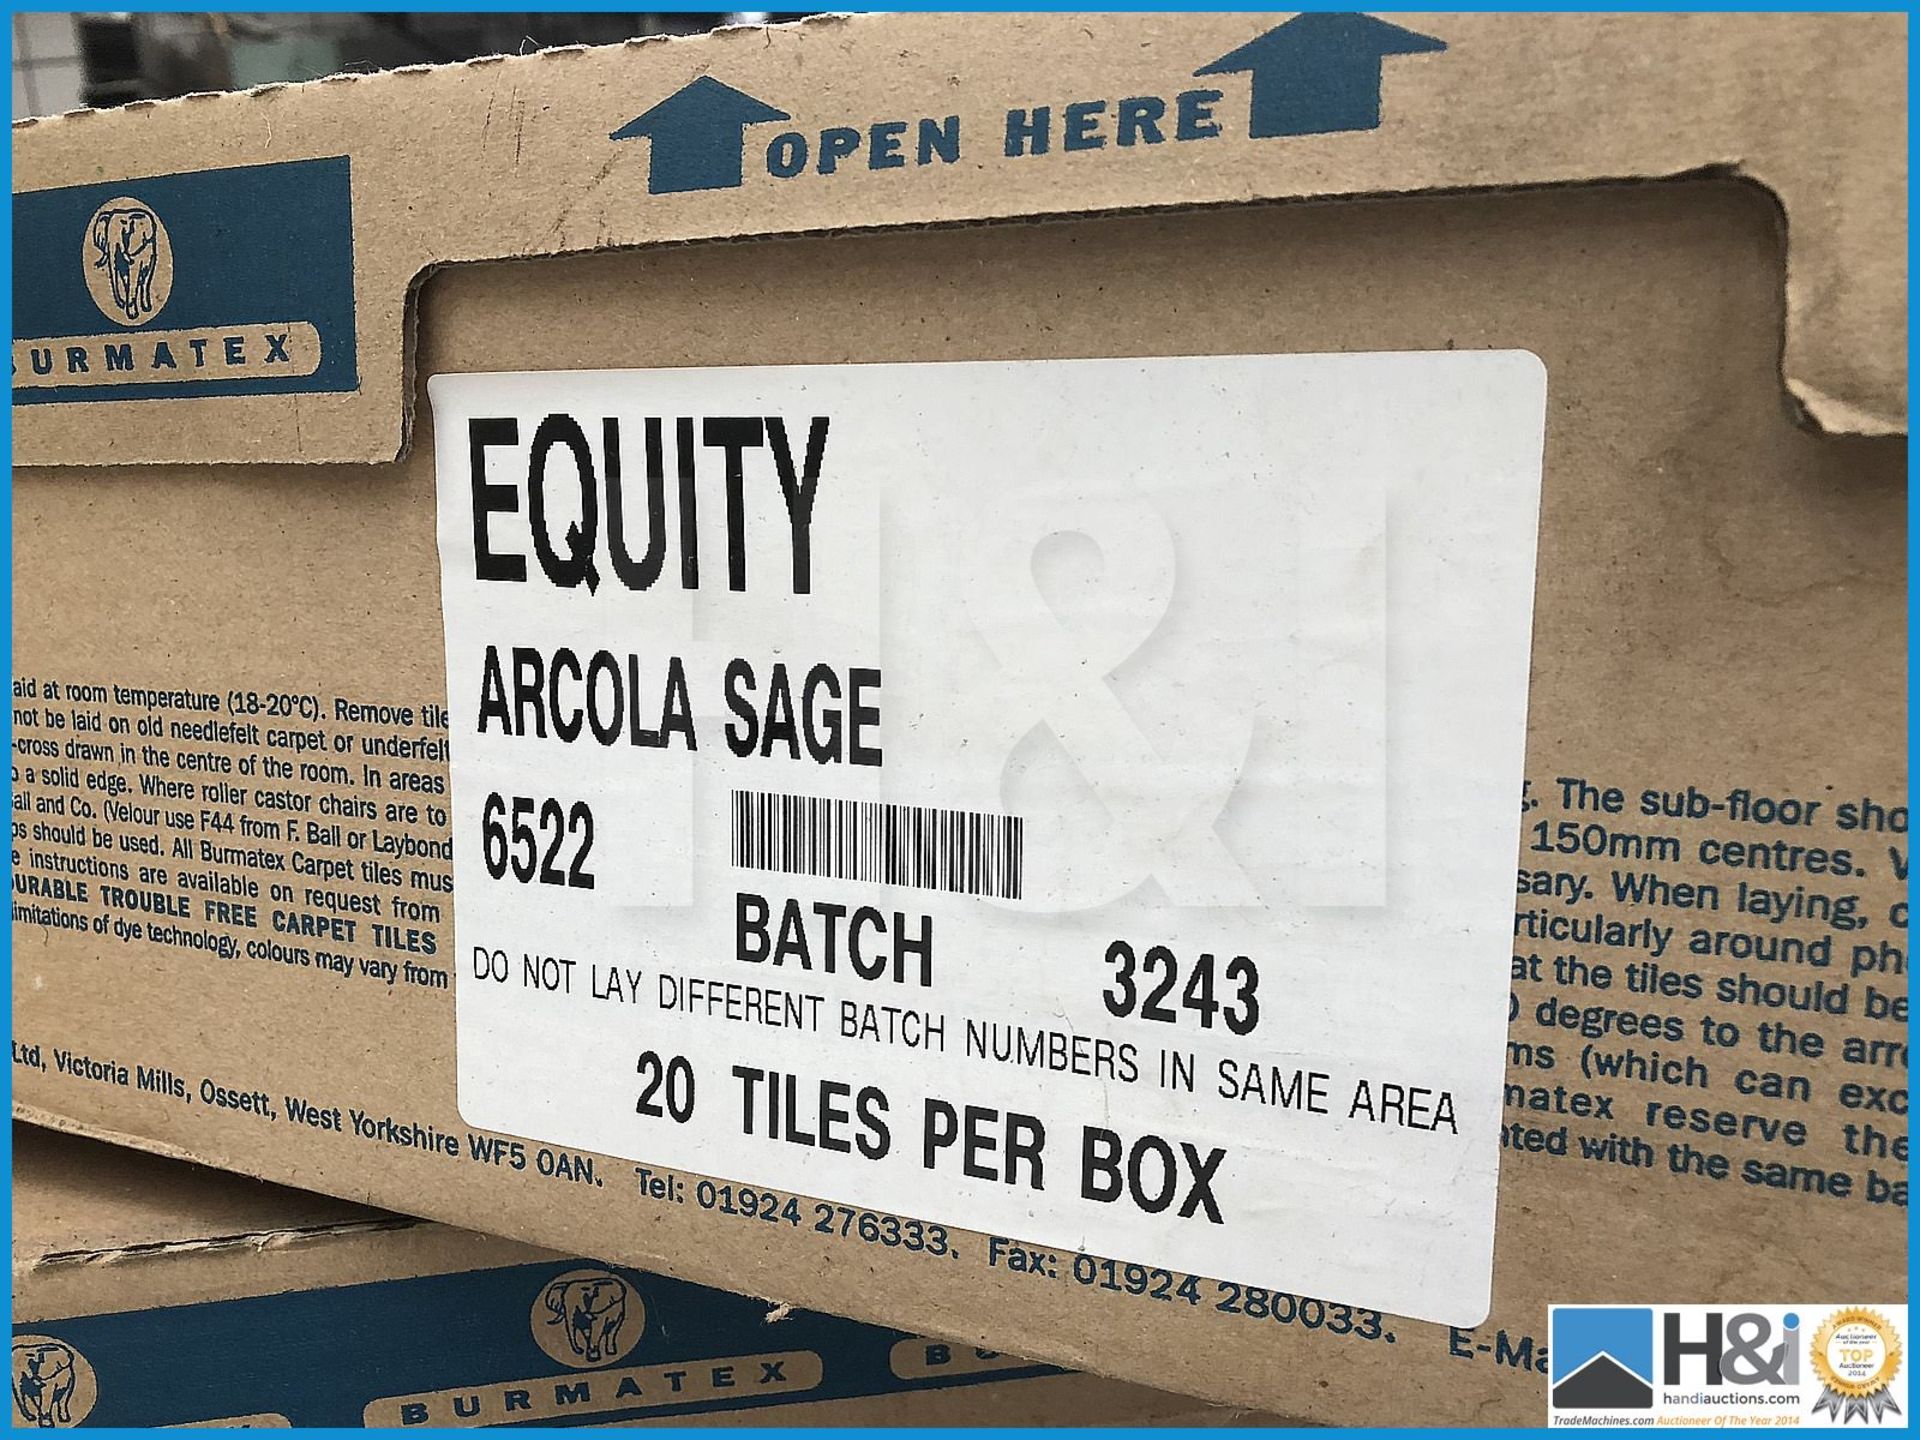 10 boxes of 20 tiles per box. Brand new Burtmatex Equity Arcola Sage ultra-high quality floor tiles. - Image 6 of 6